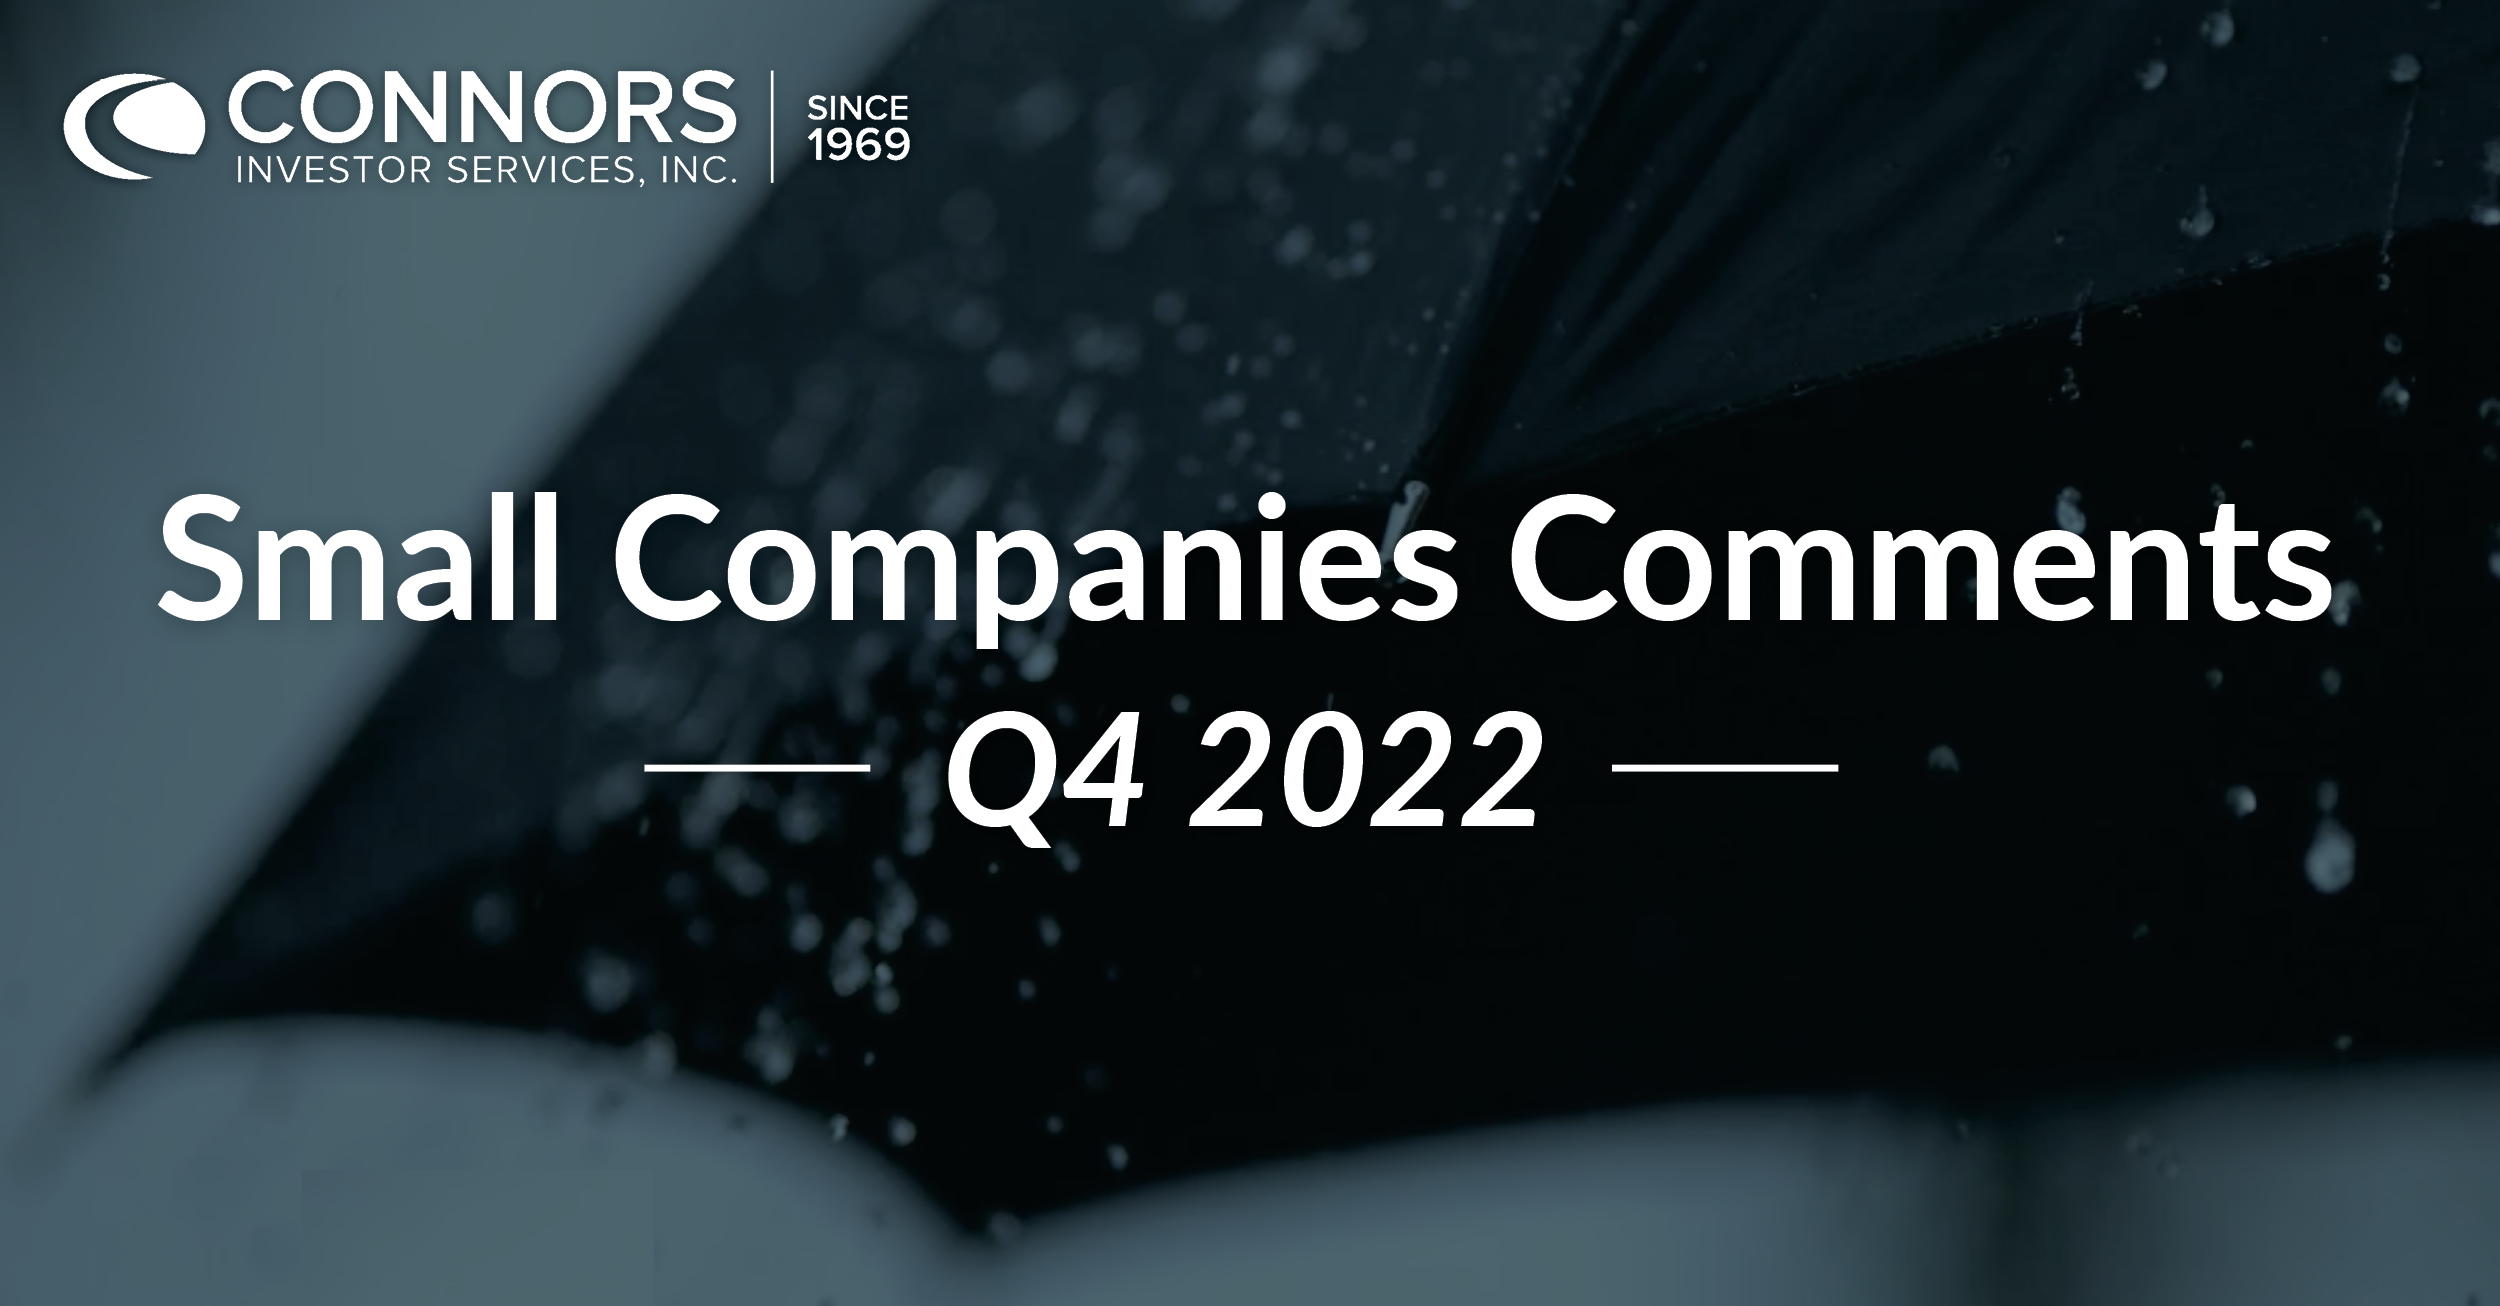 Q4 2022 Small Companies Comments